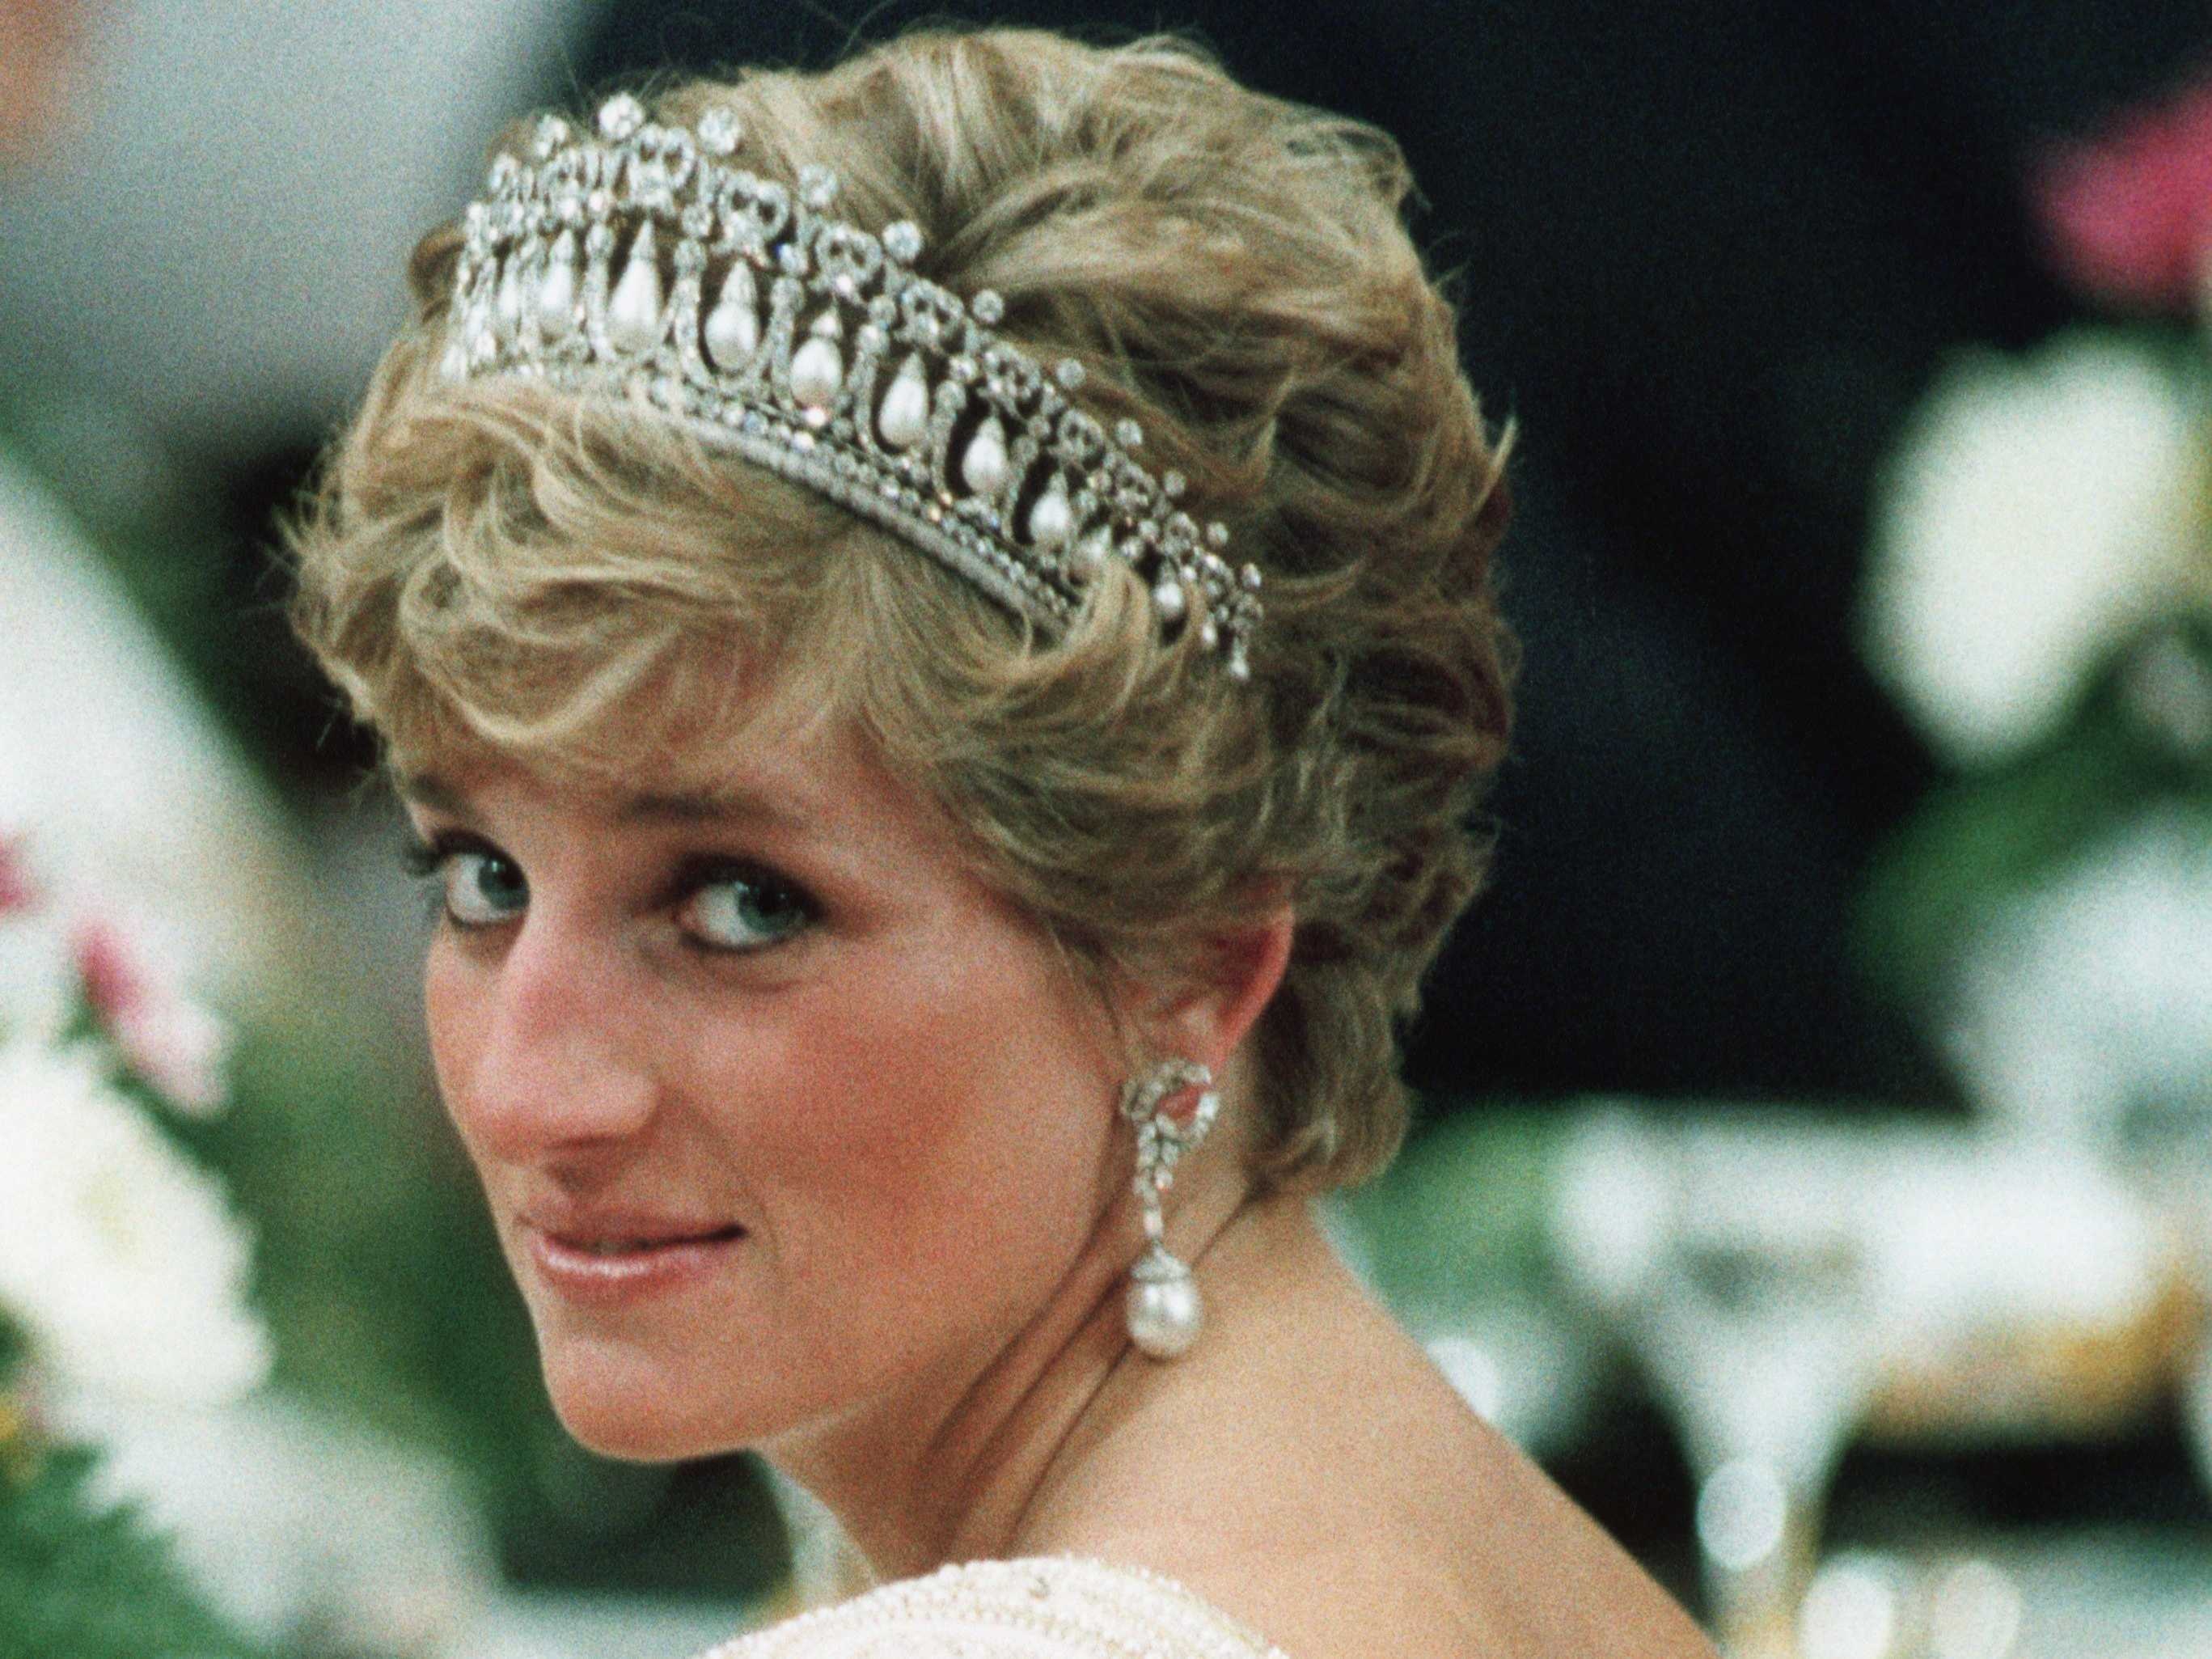 Princess Diana: The former consort (1981–96) of Charles, Prince of Wales. 2740x2060 HD Background.